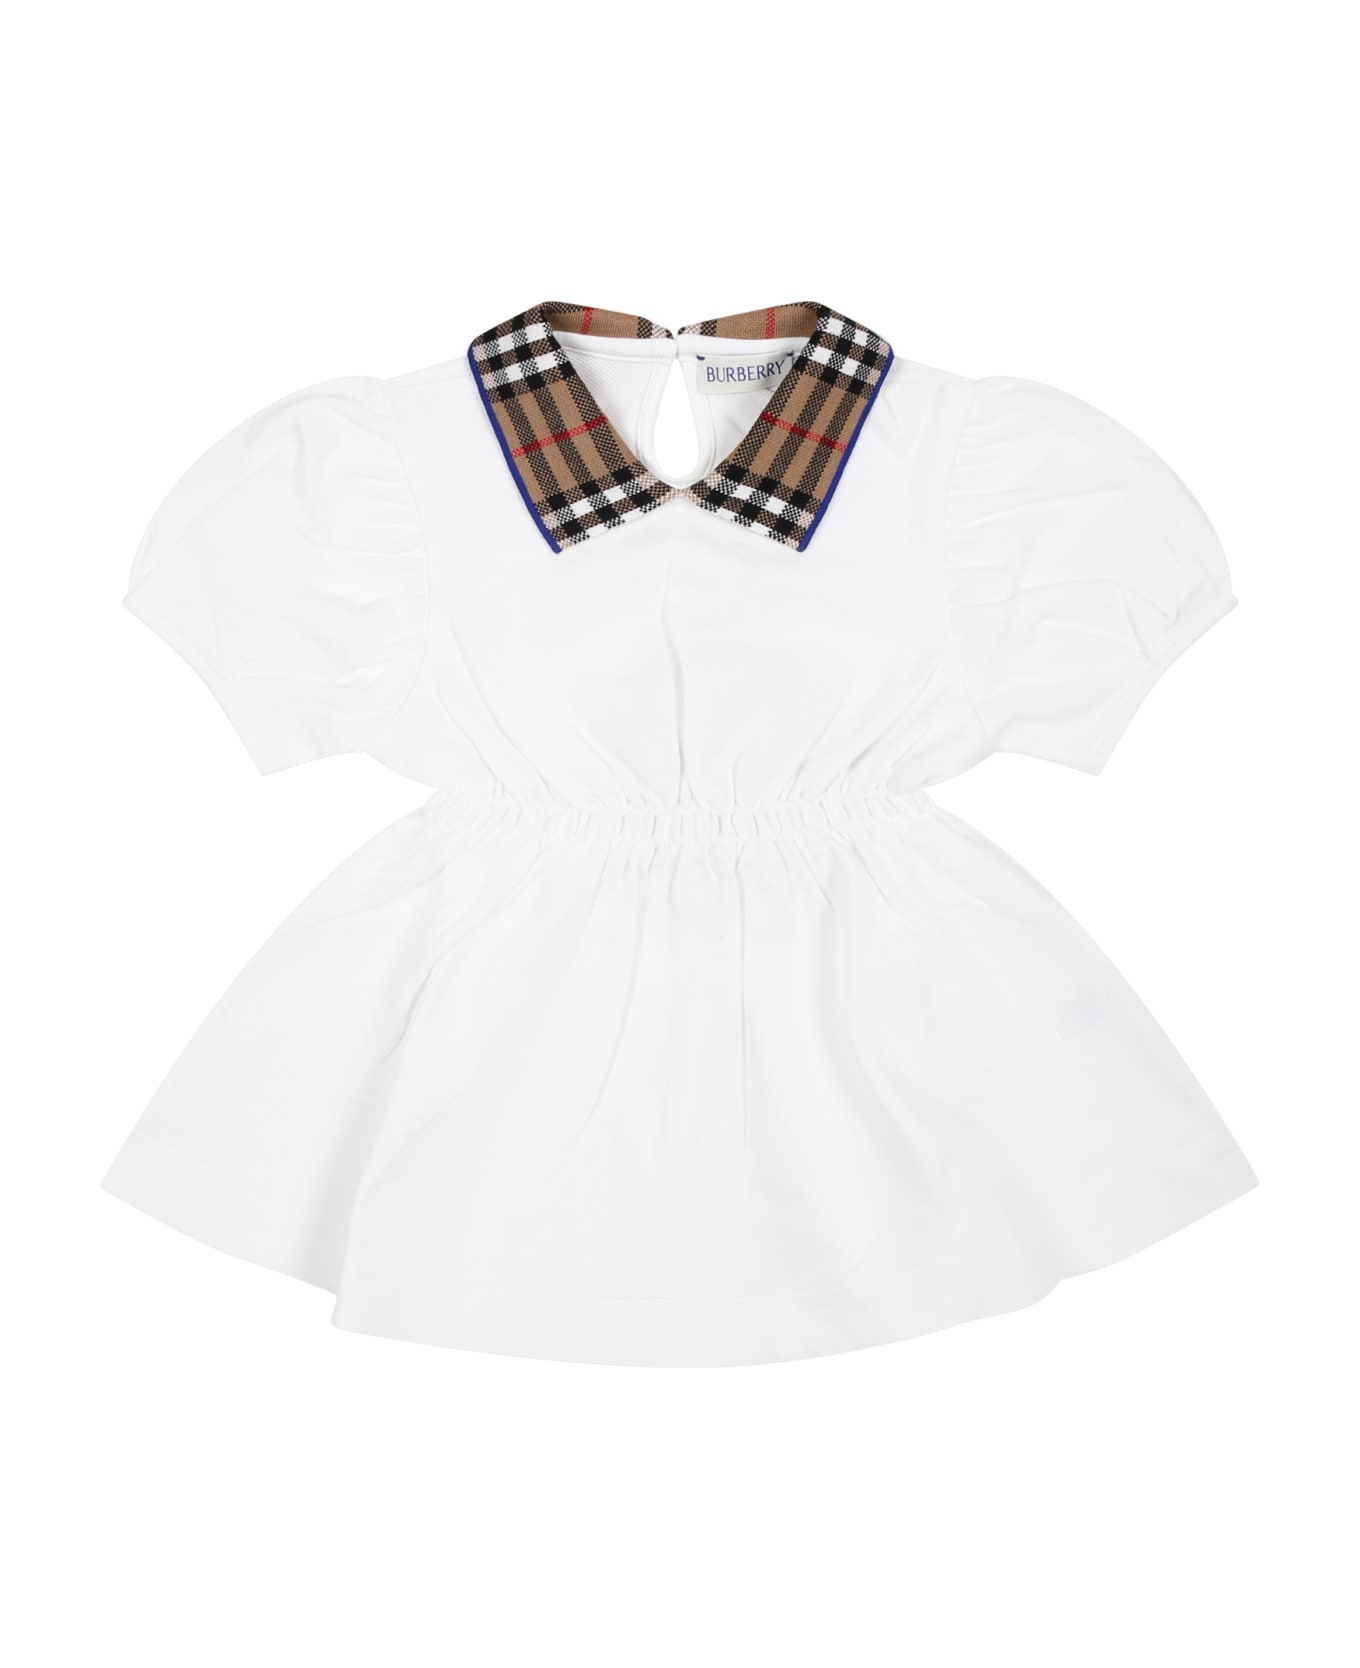 Burberry White Dress For Baby Girl With Vintage Check On The Collar - White